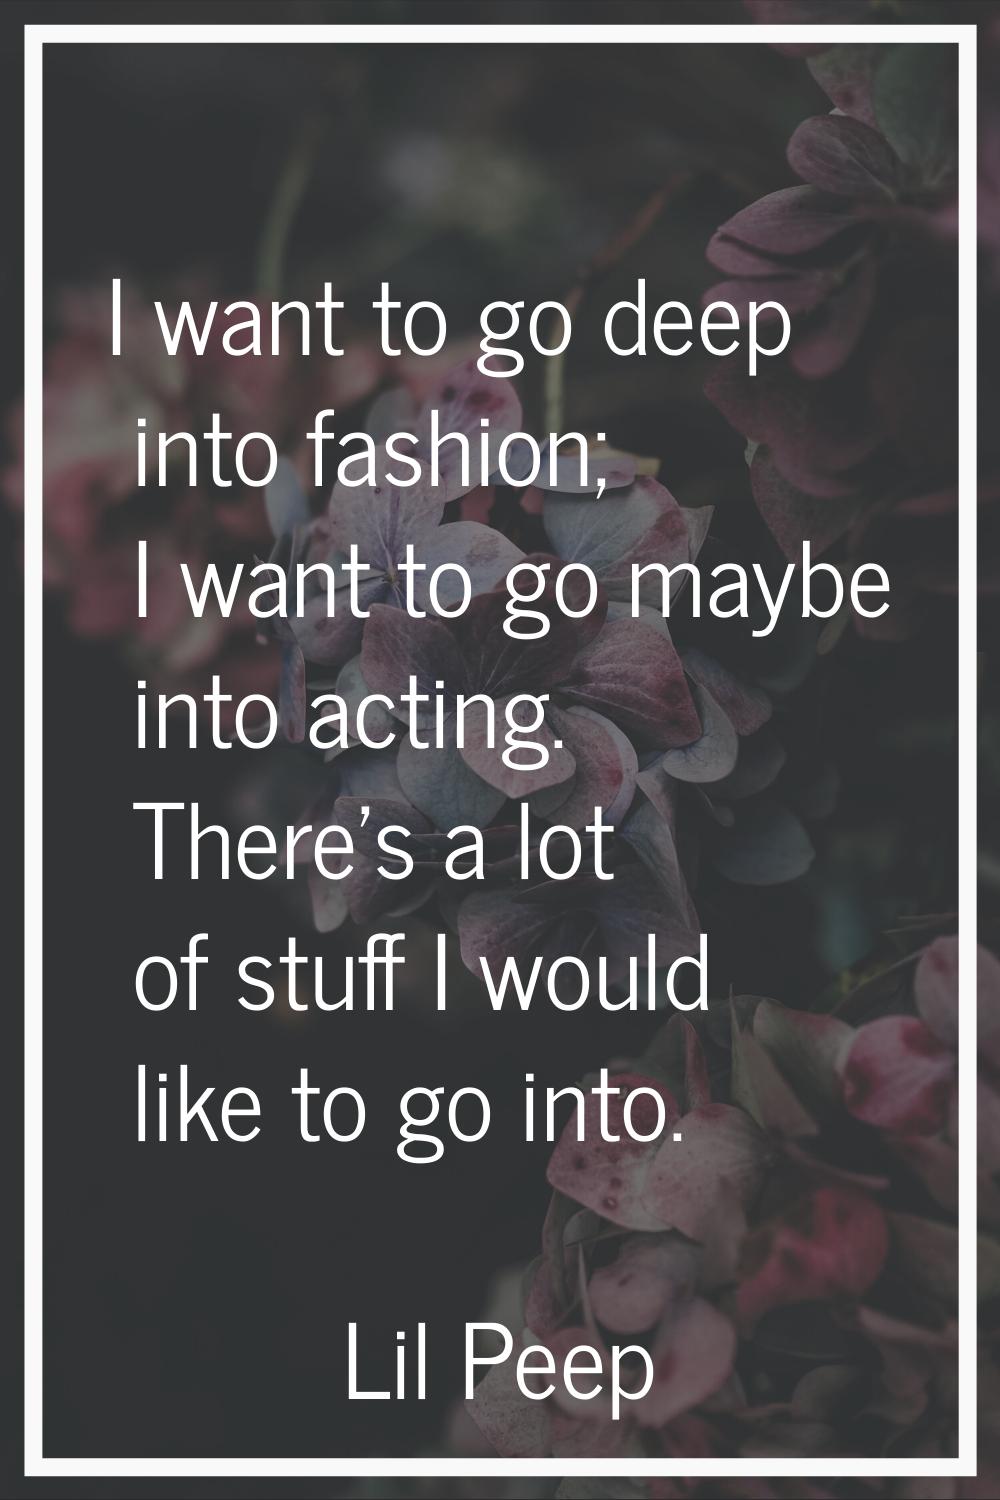 I want to go deep into fashion; I want to go maybe into acting. There's a lot of stuff I would like